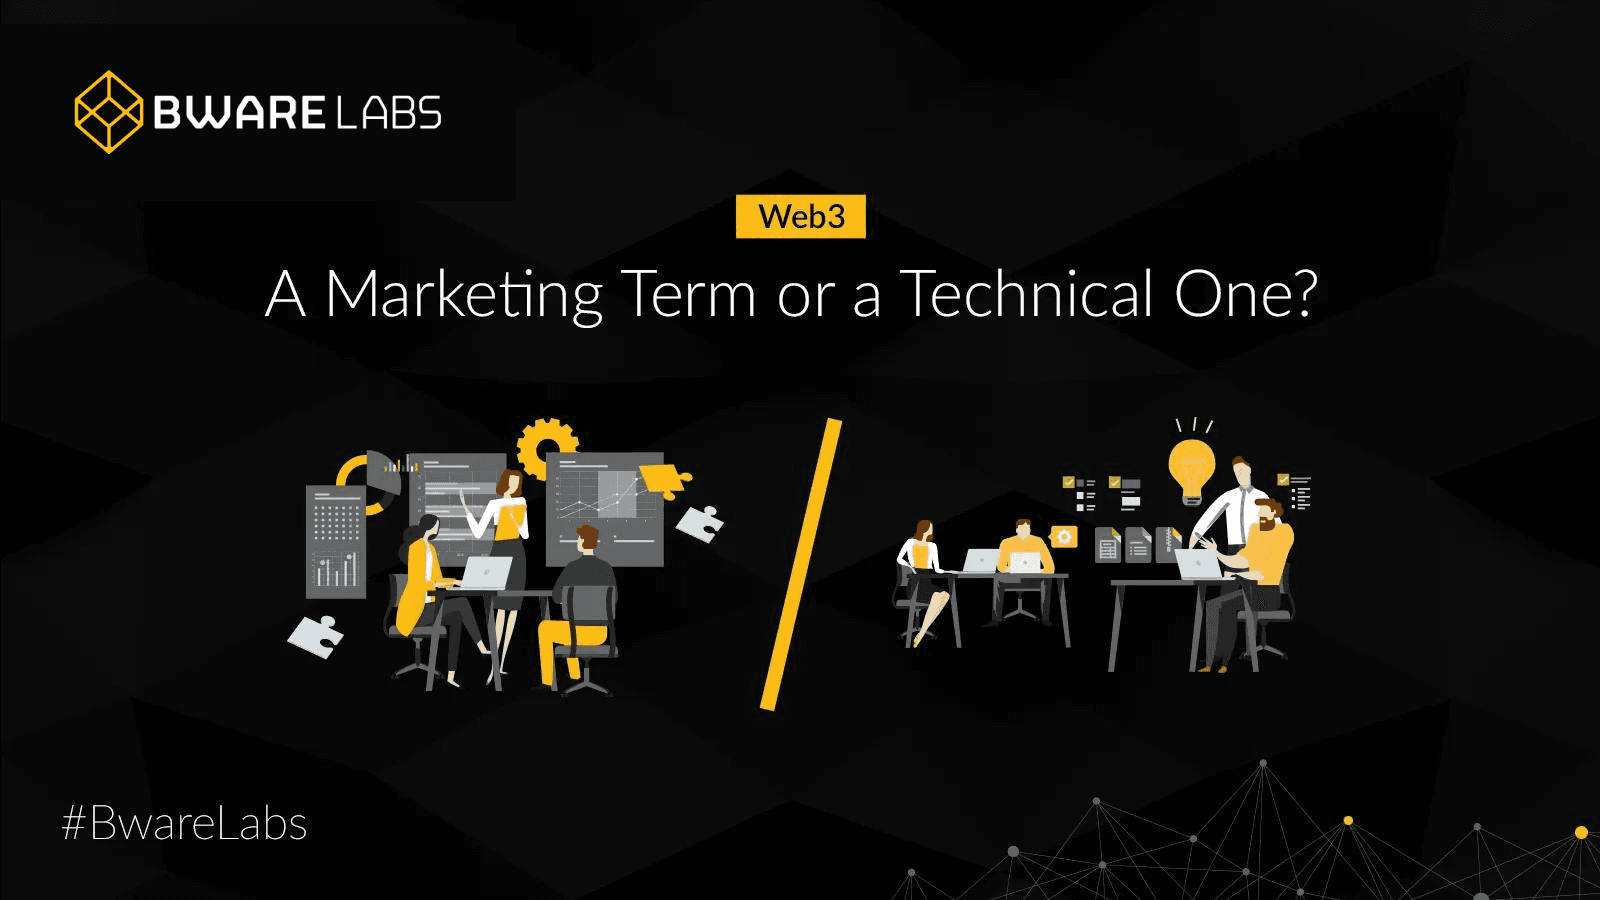 Is Web3 a Marketing Term or a Technical Term? It’s not that simple.